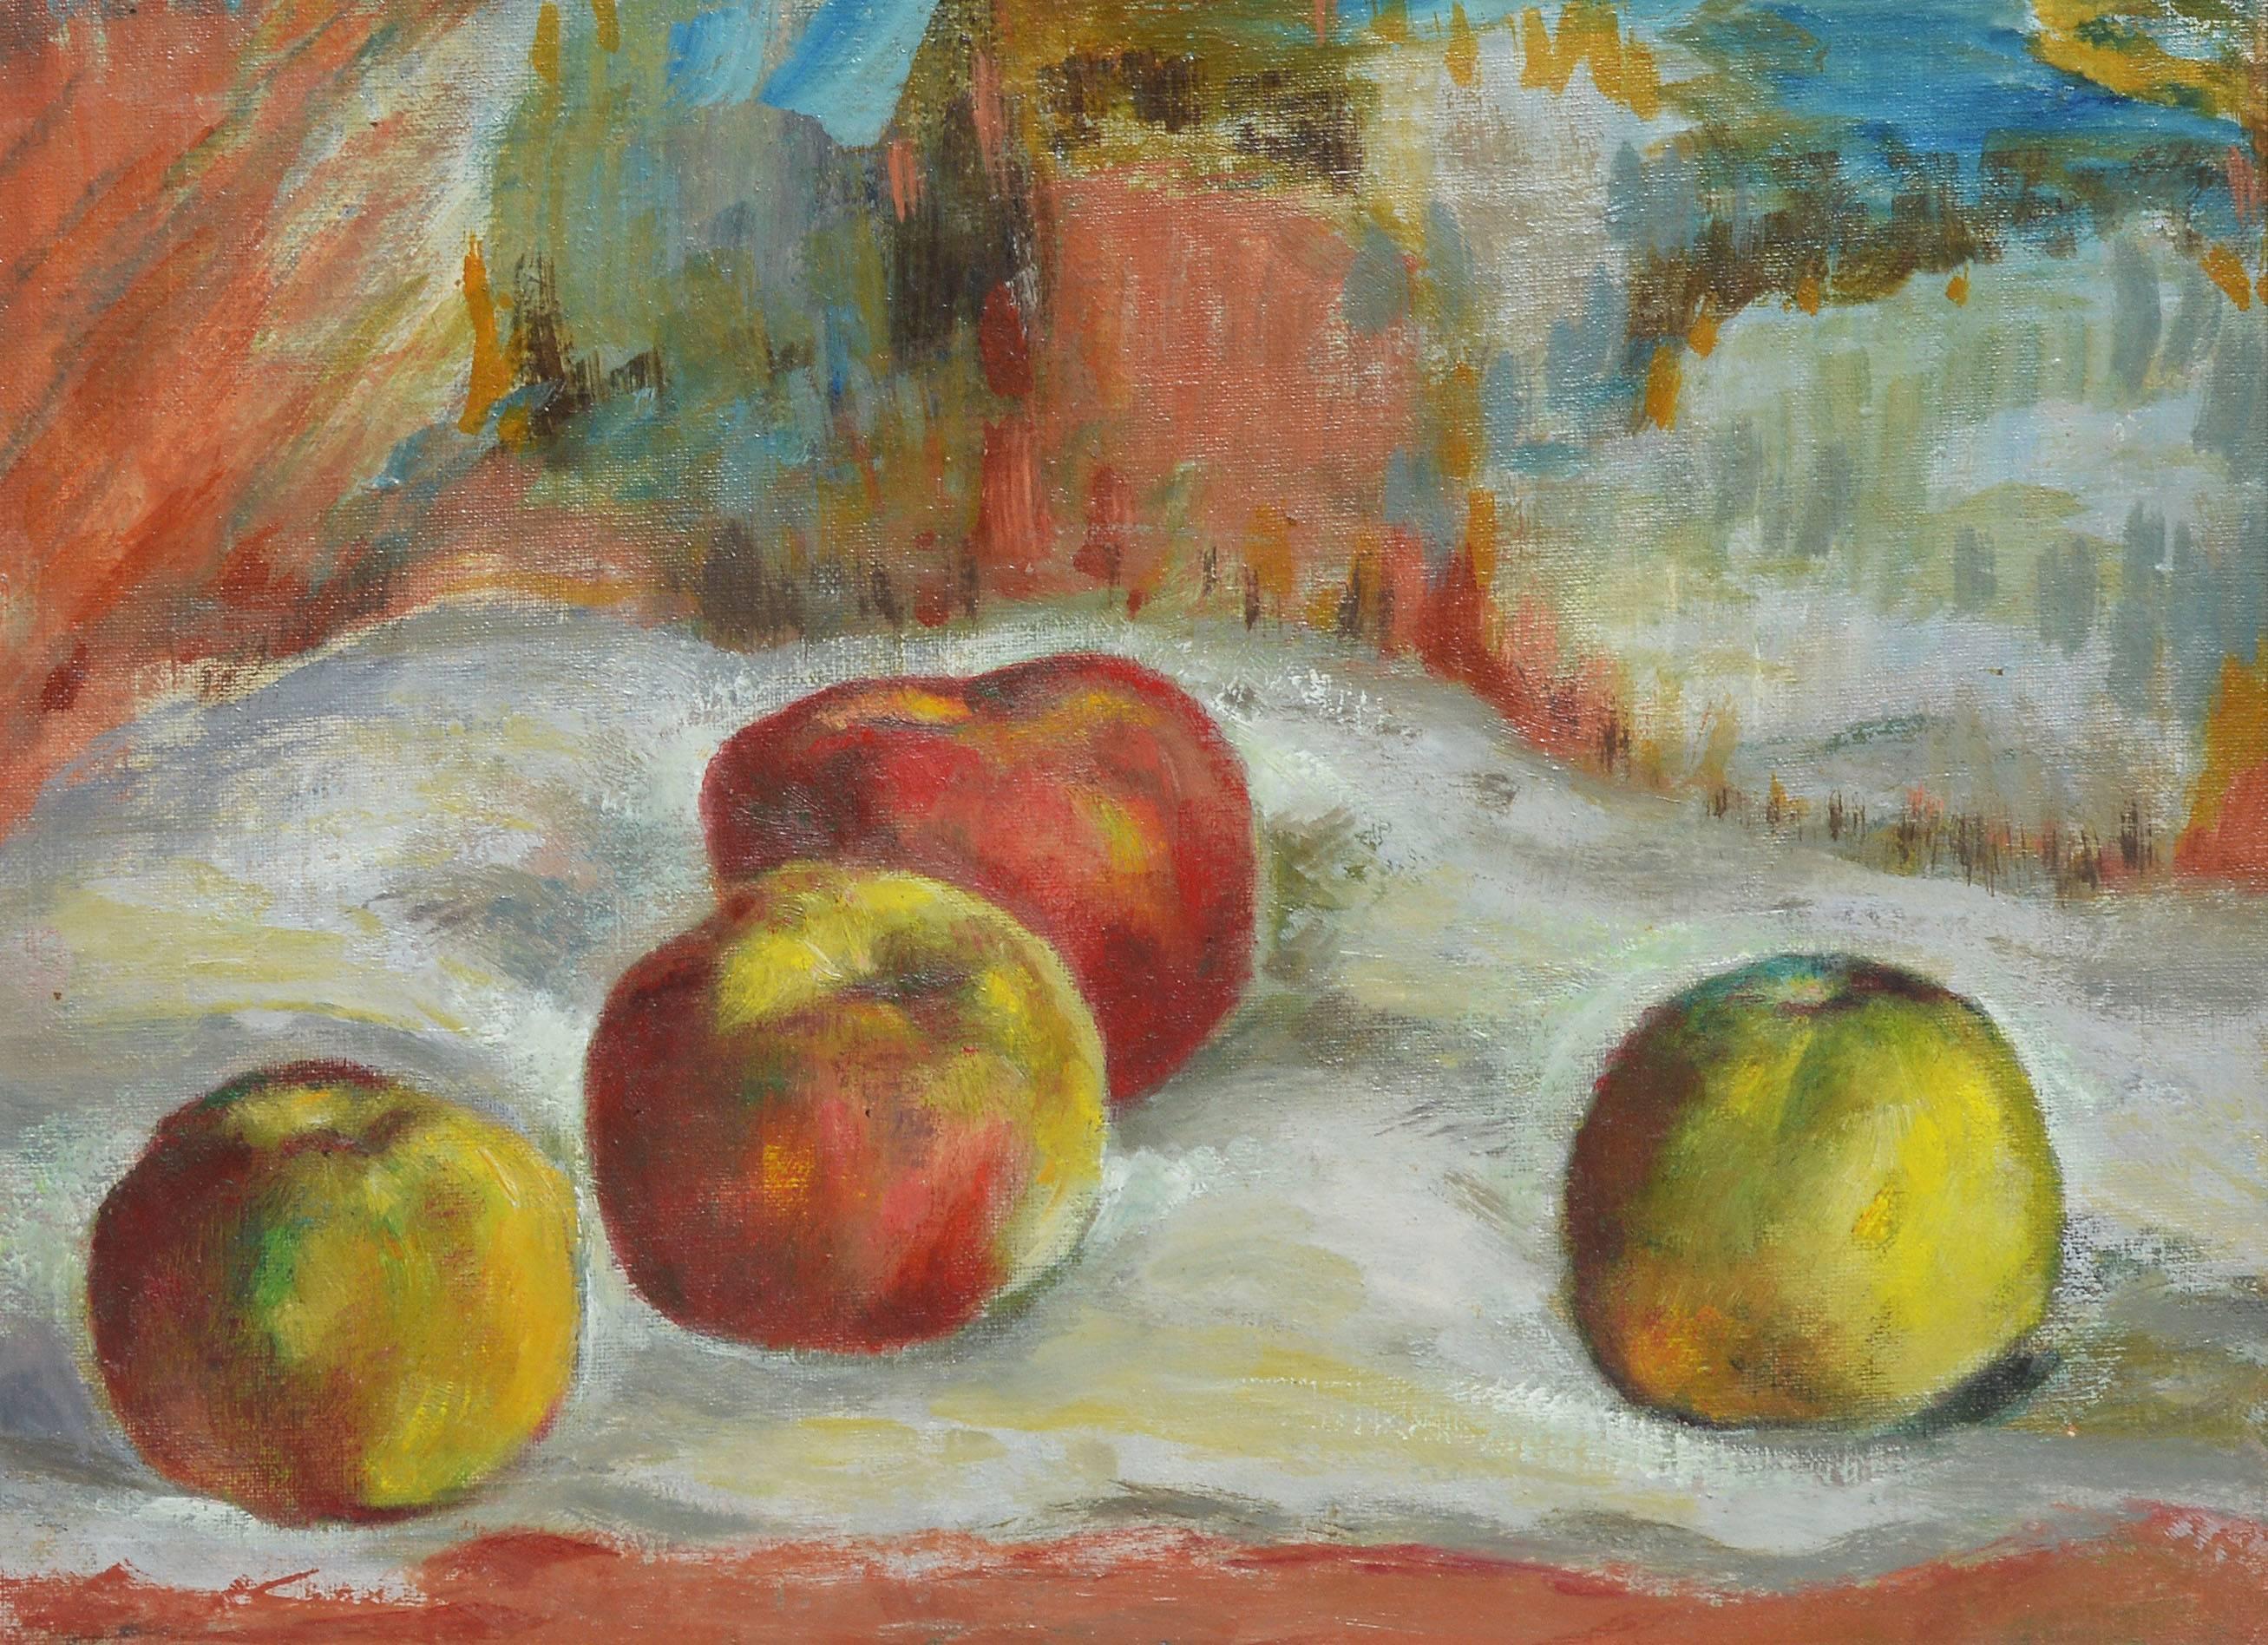 Modernist Apple Still Life - Brown Still-Life Painting by Unknown